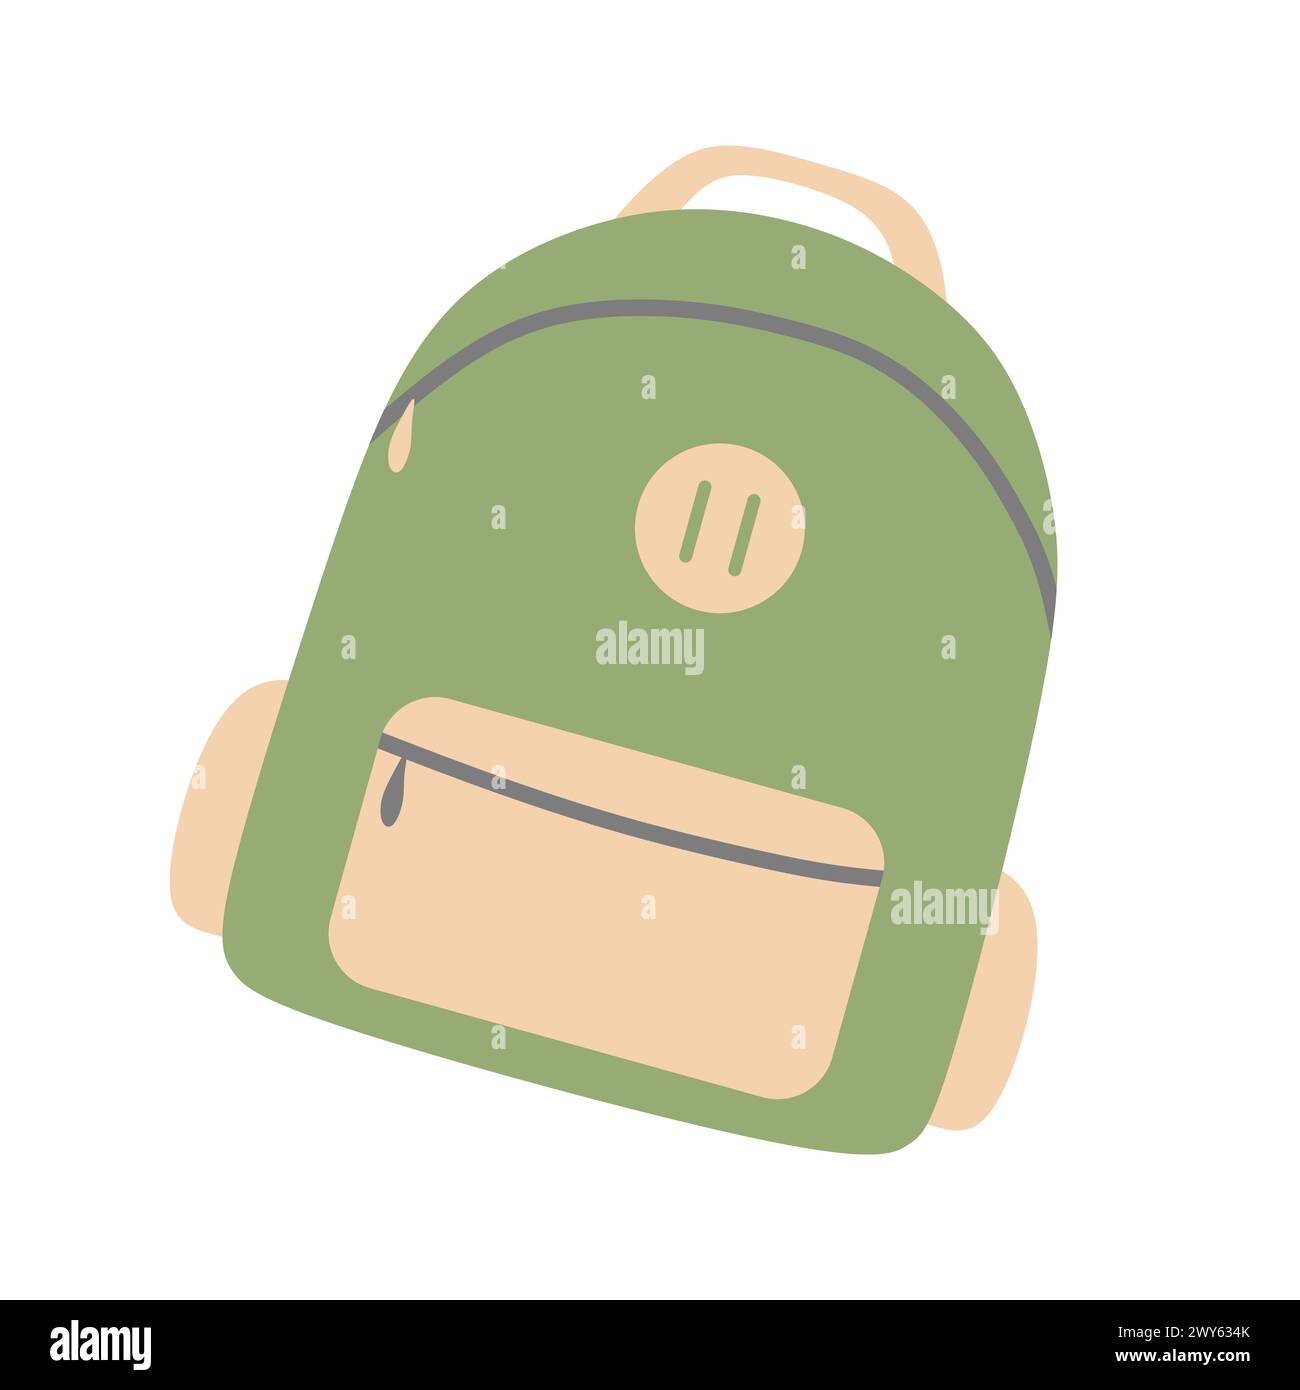 Green backpack in Simple Cartoon style Isolated on white background. School Satchel, Travel rucksack. Vector Flat Illustration of Accessory, Sport bag Stock Vector